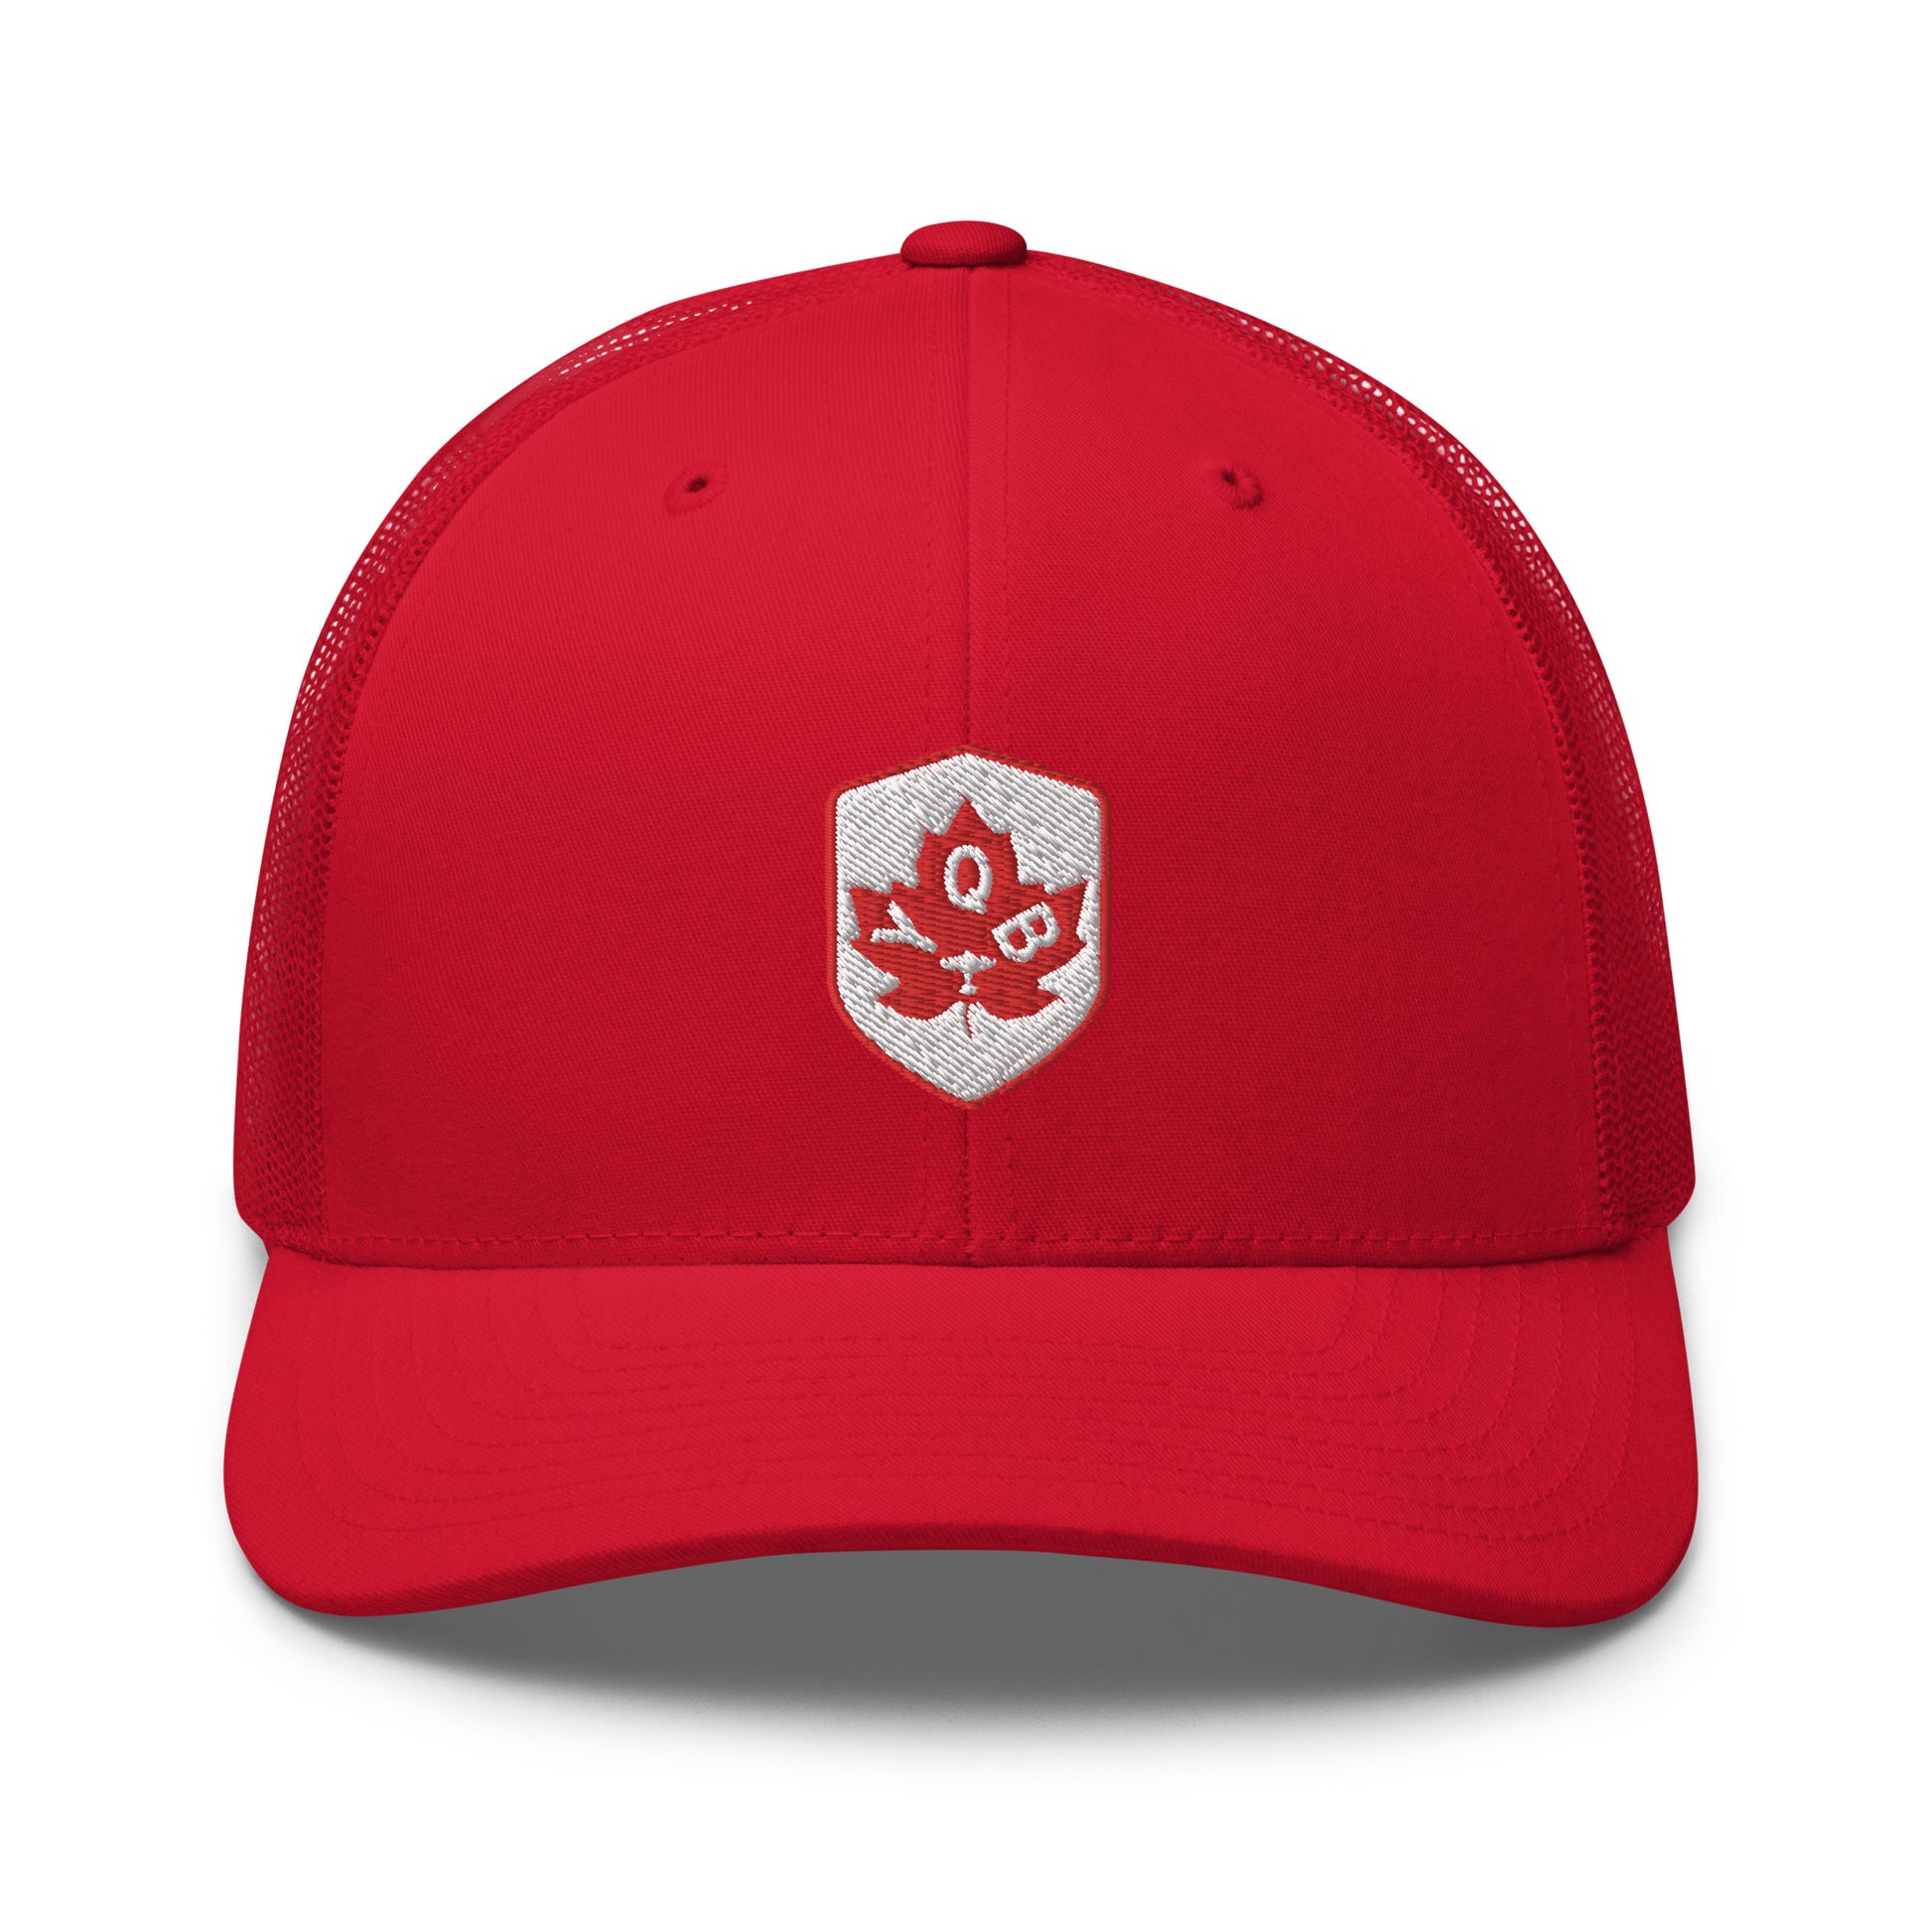 Maple Leaf Trucker Hat - Red/White • YQB Quebec City • YHM Designs - Image 23